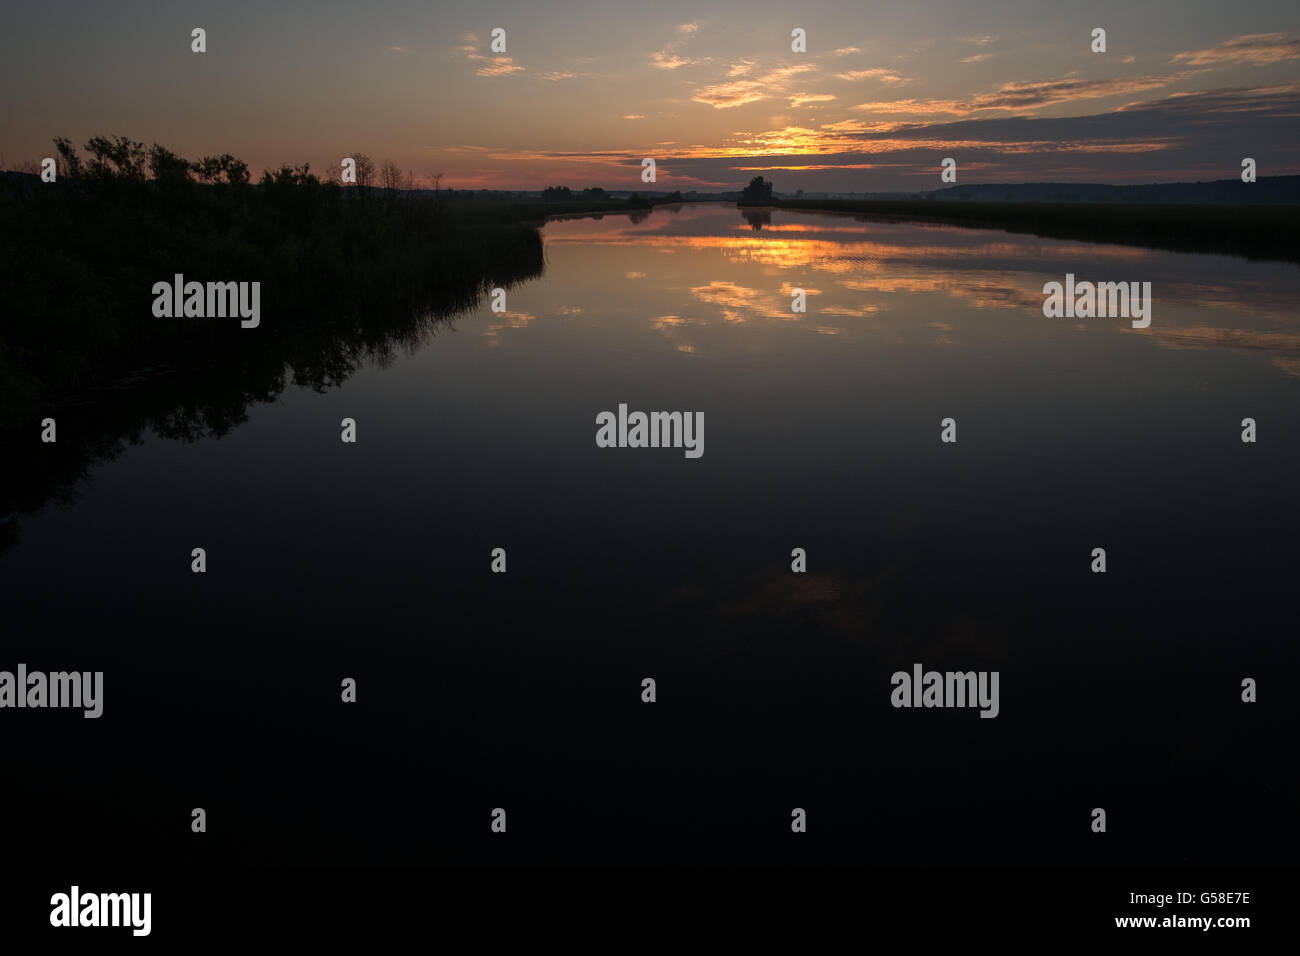 Sunrise over the White River in Montague, Michigan, USA Stock Photo